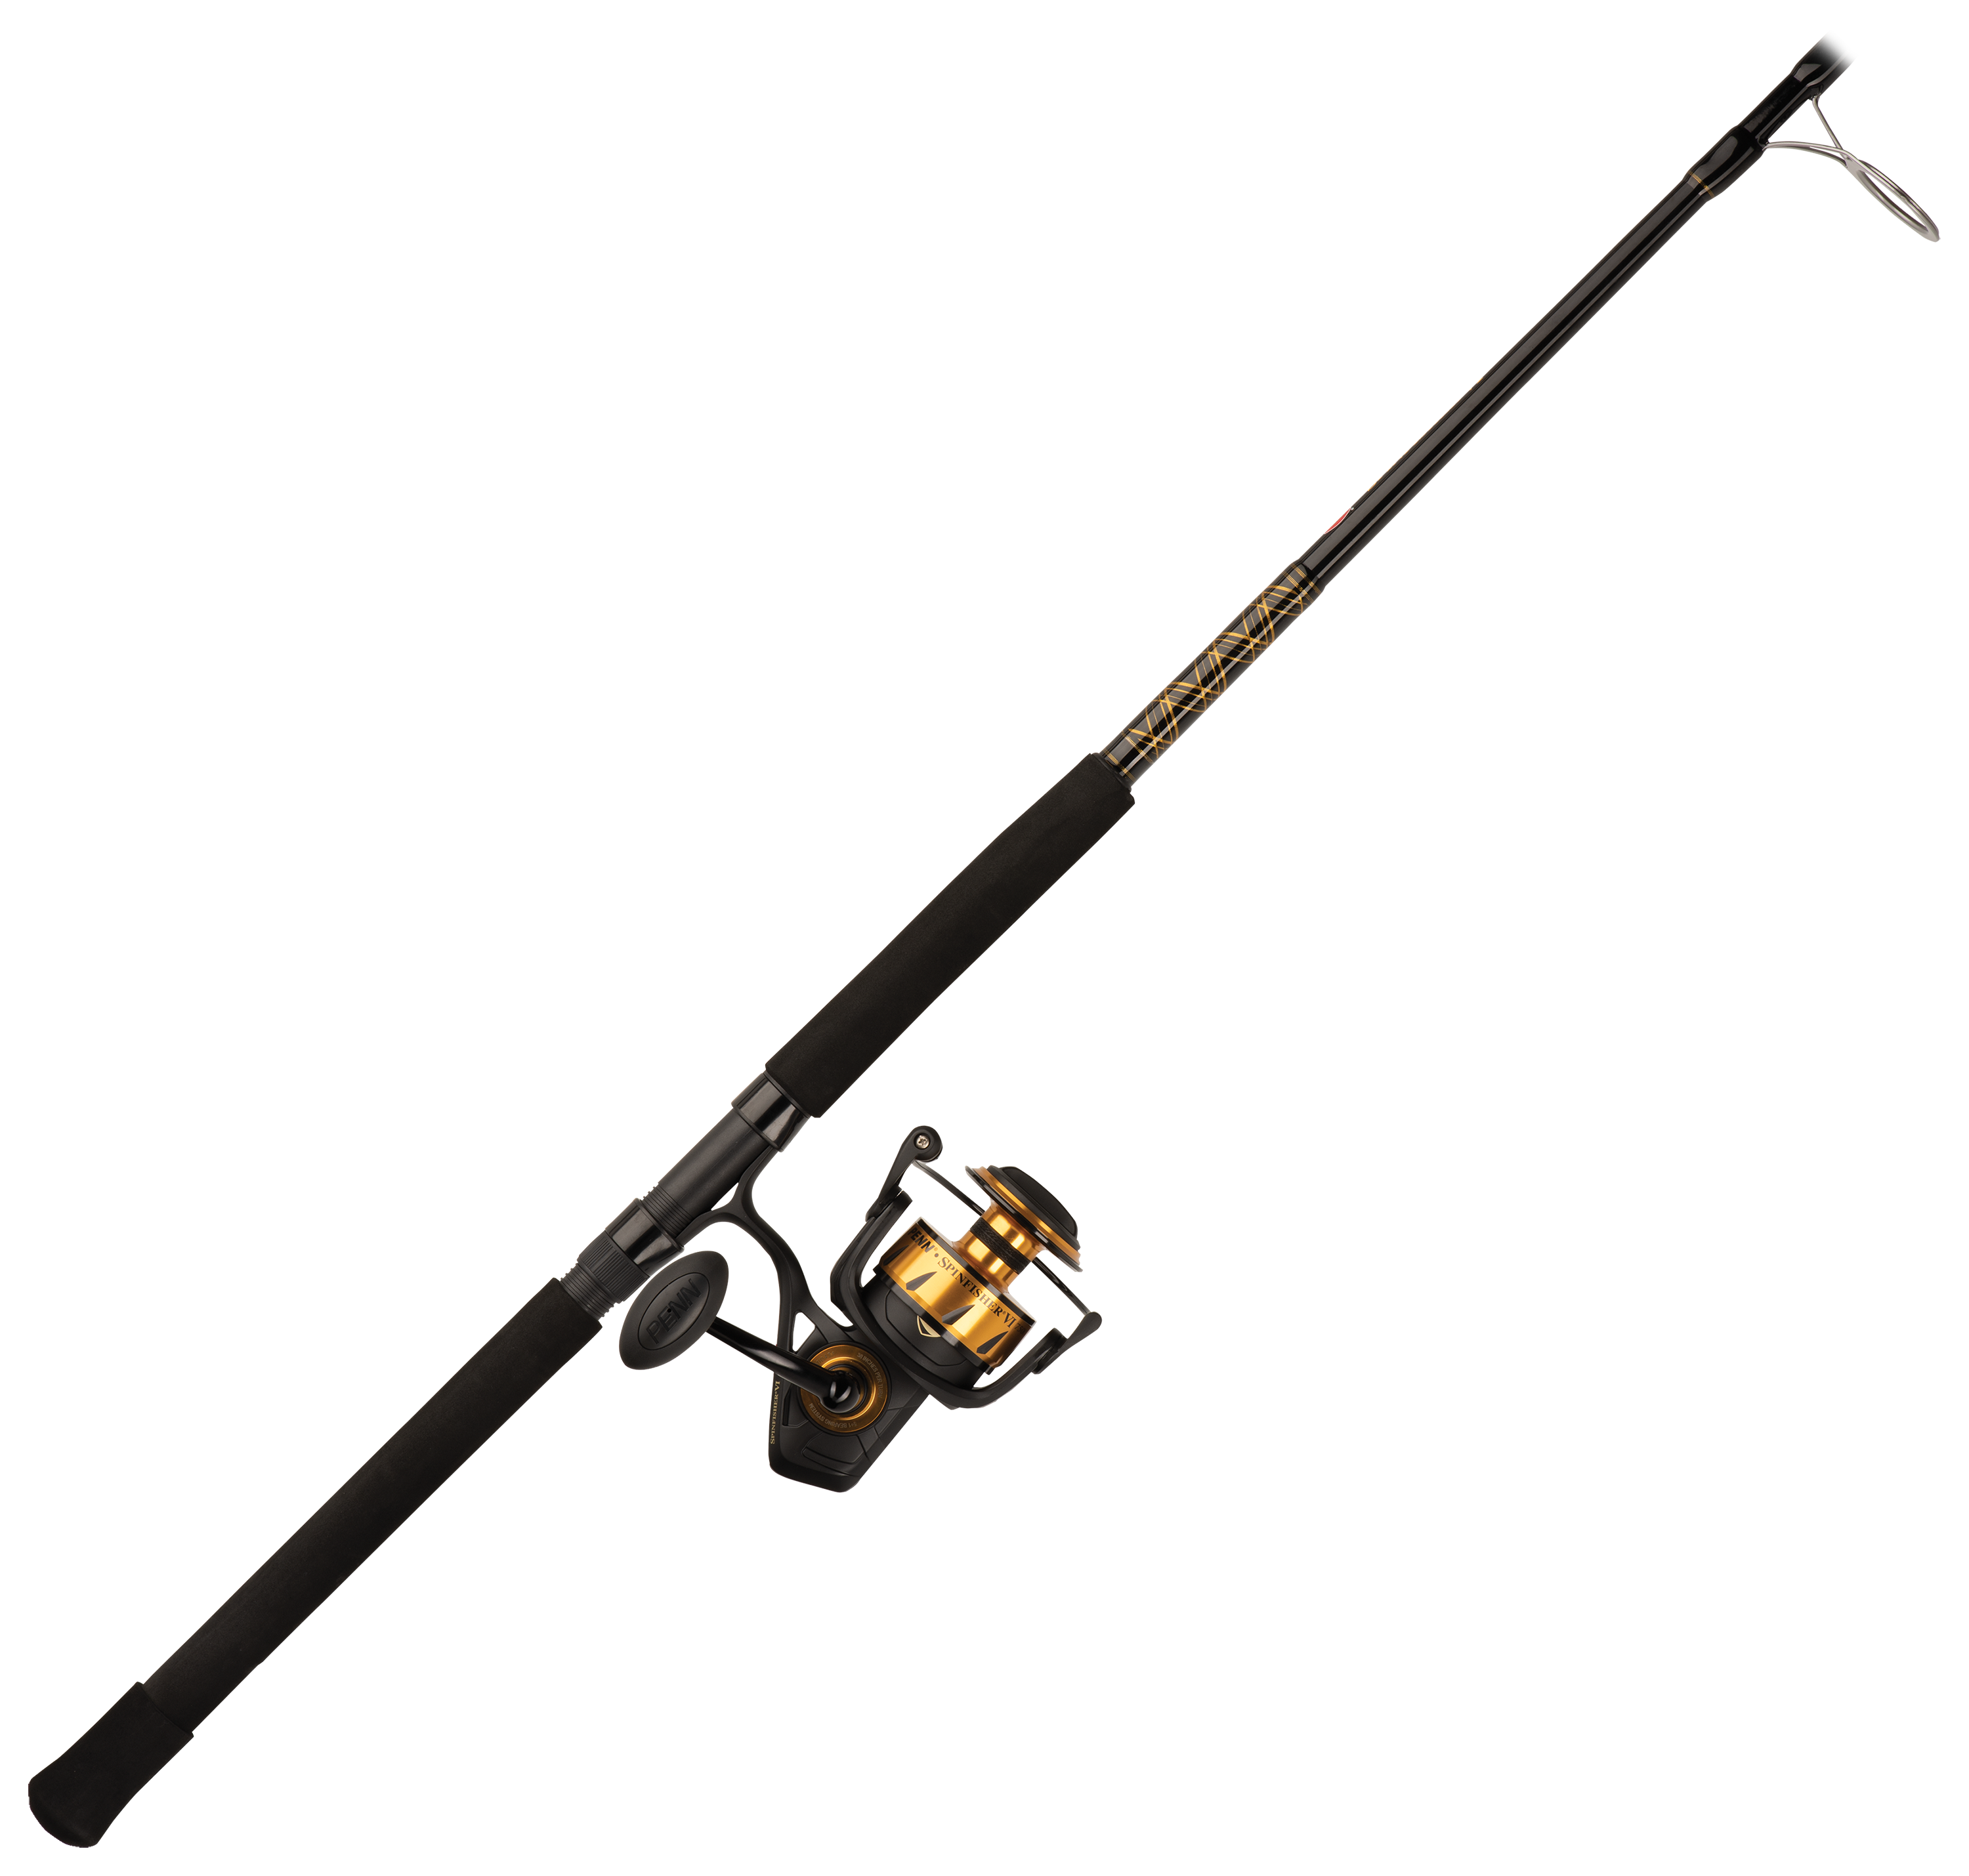 PENN Spinfisher VI 7500 or 8500 Boat Spinning Rod and Reel Combo